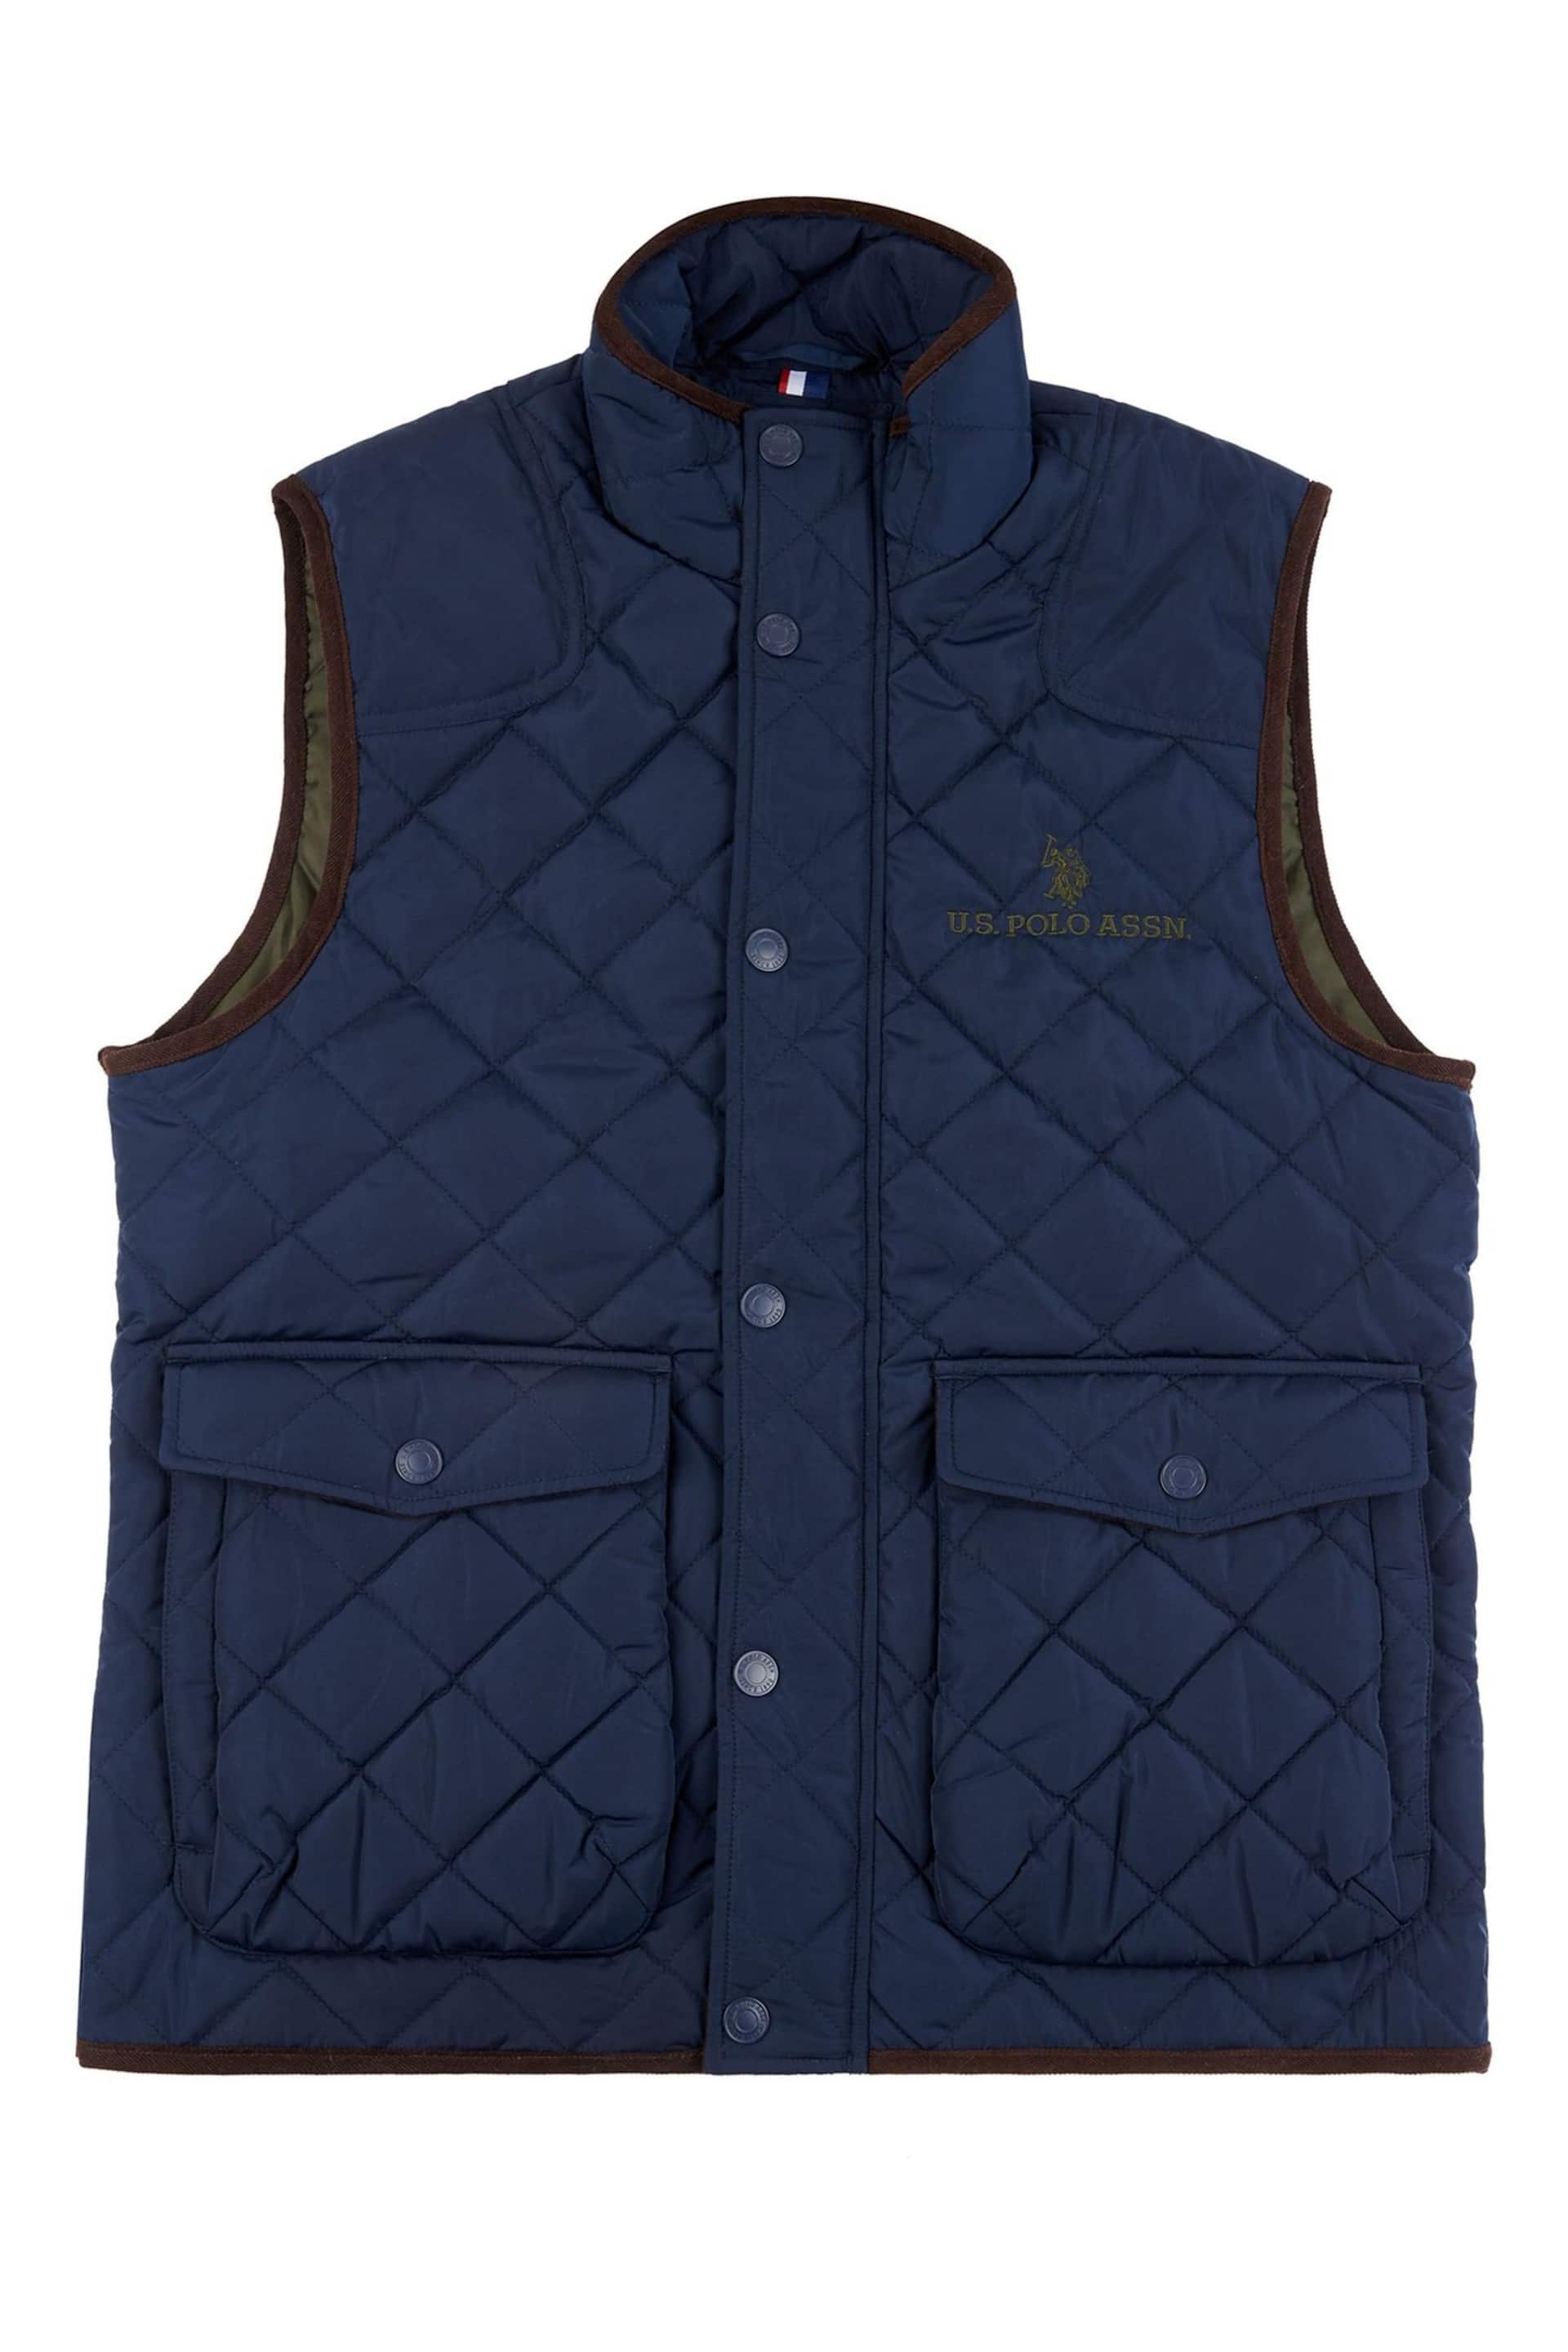 U.S. Polo Assn. Mens Blue Quilted Hacking Gilet - Image 6 of 8